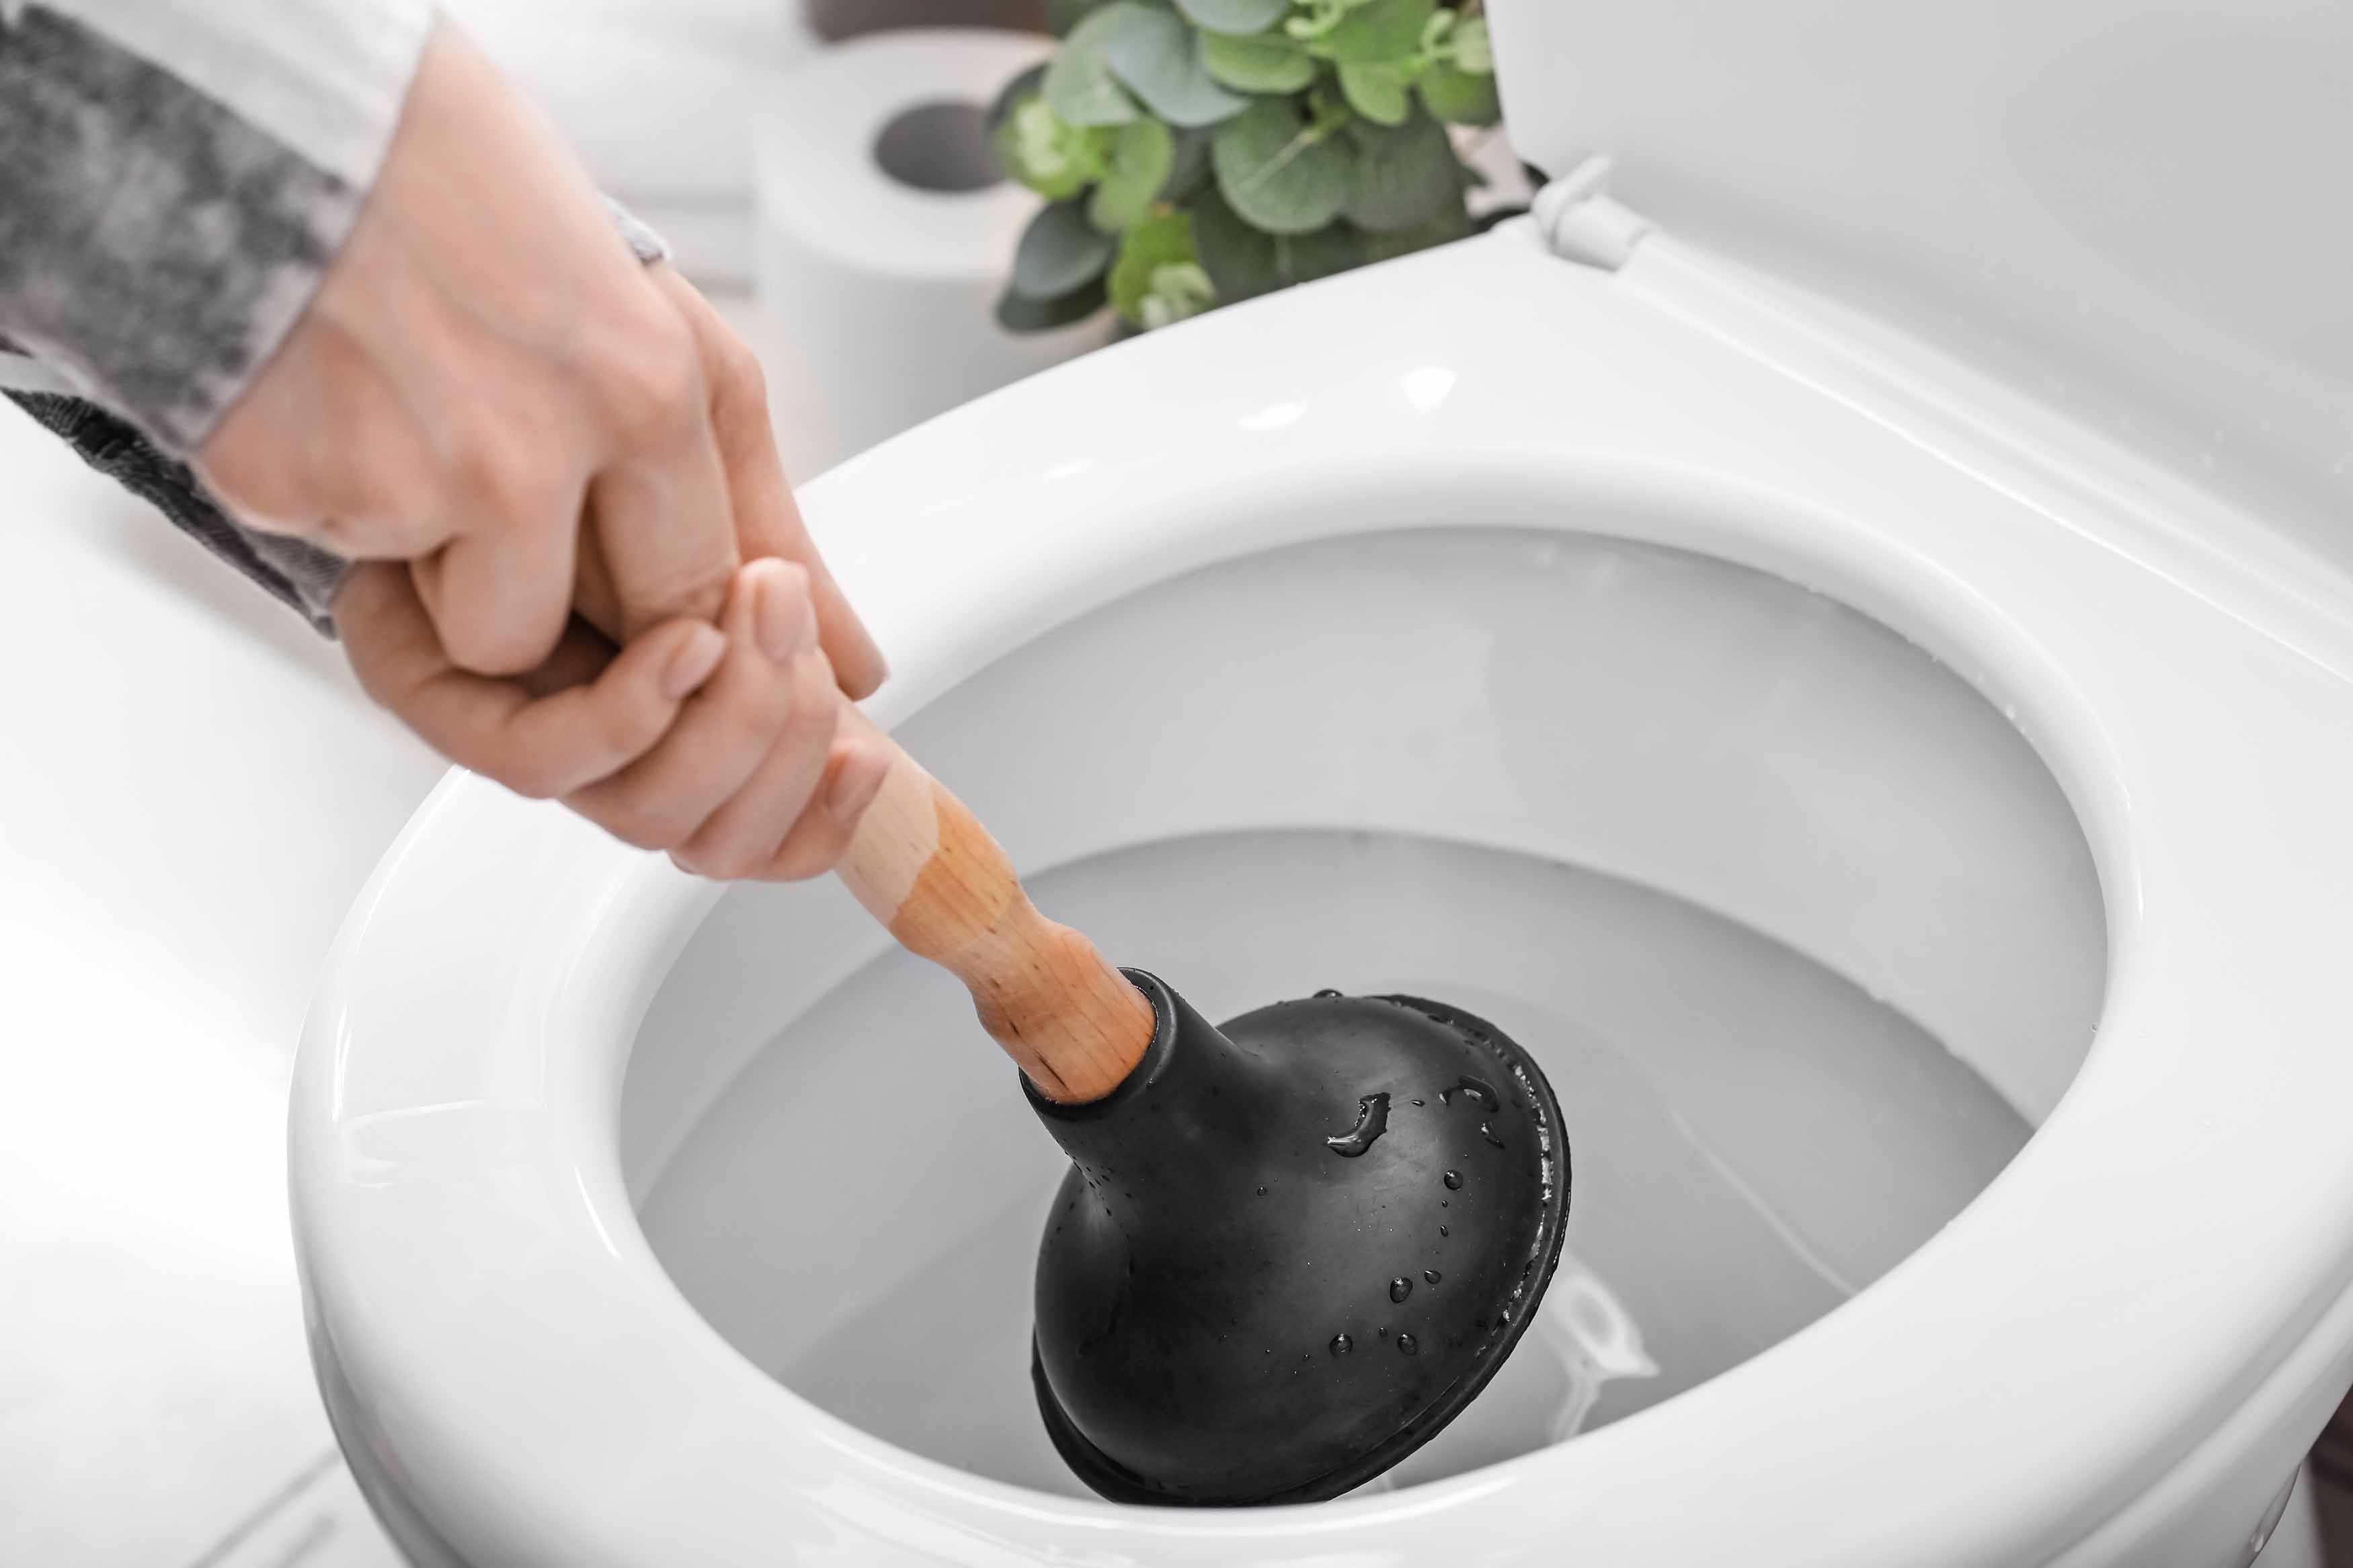 My Toilet is Clogged! What Should I Do? Ask a Plumber - Plumbing